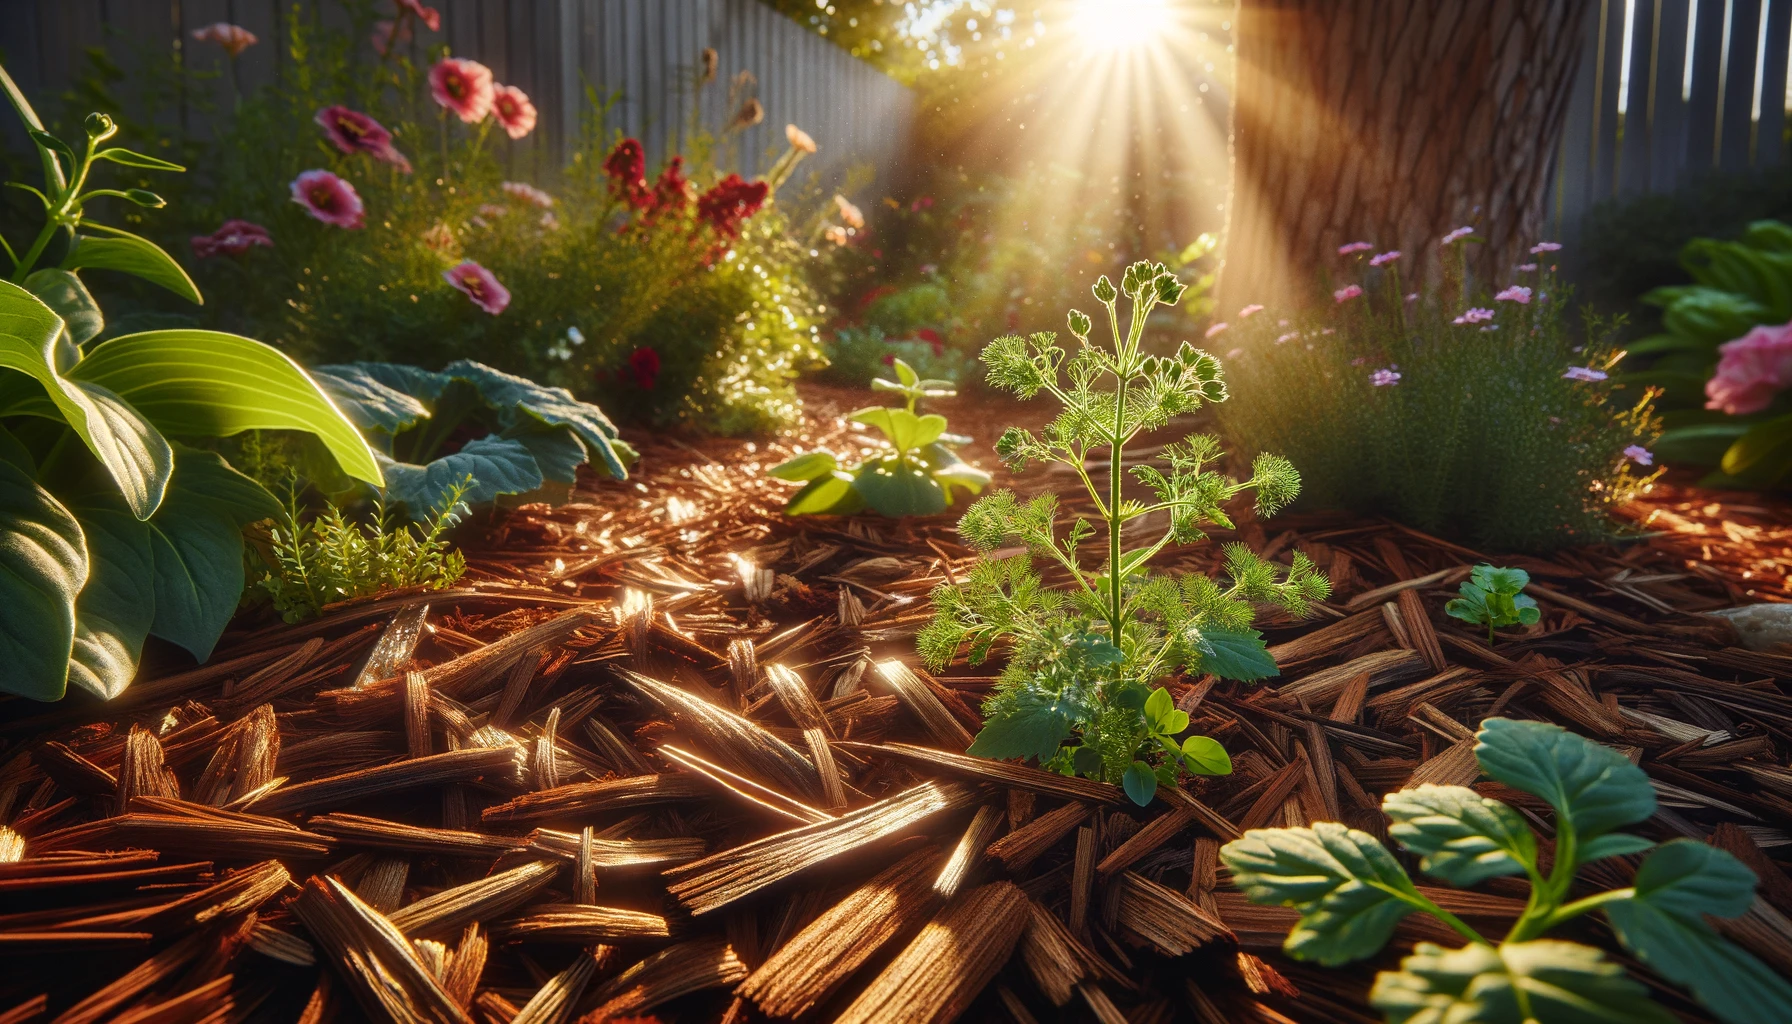 Sunlit garden with blossoming flowers and mulch.